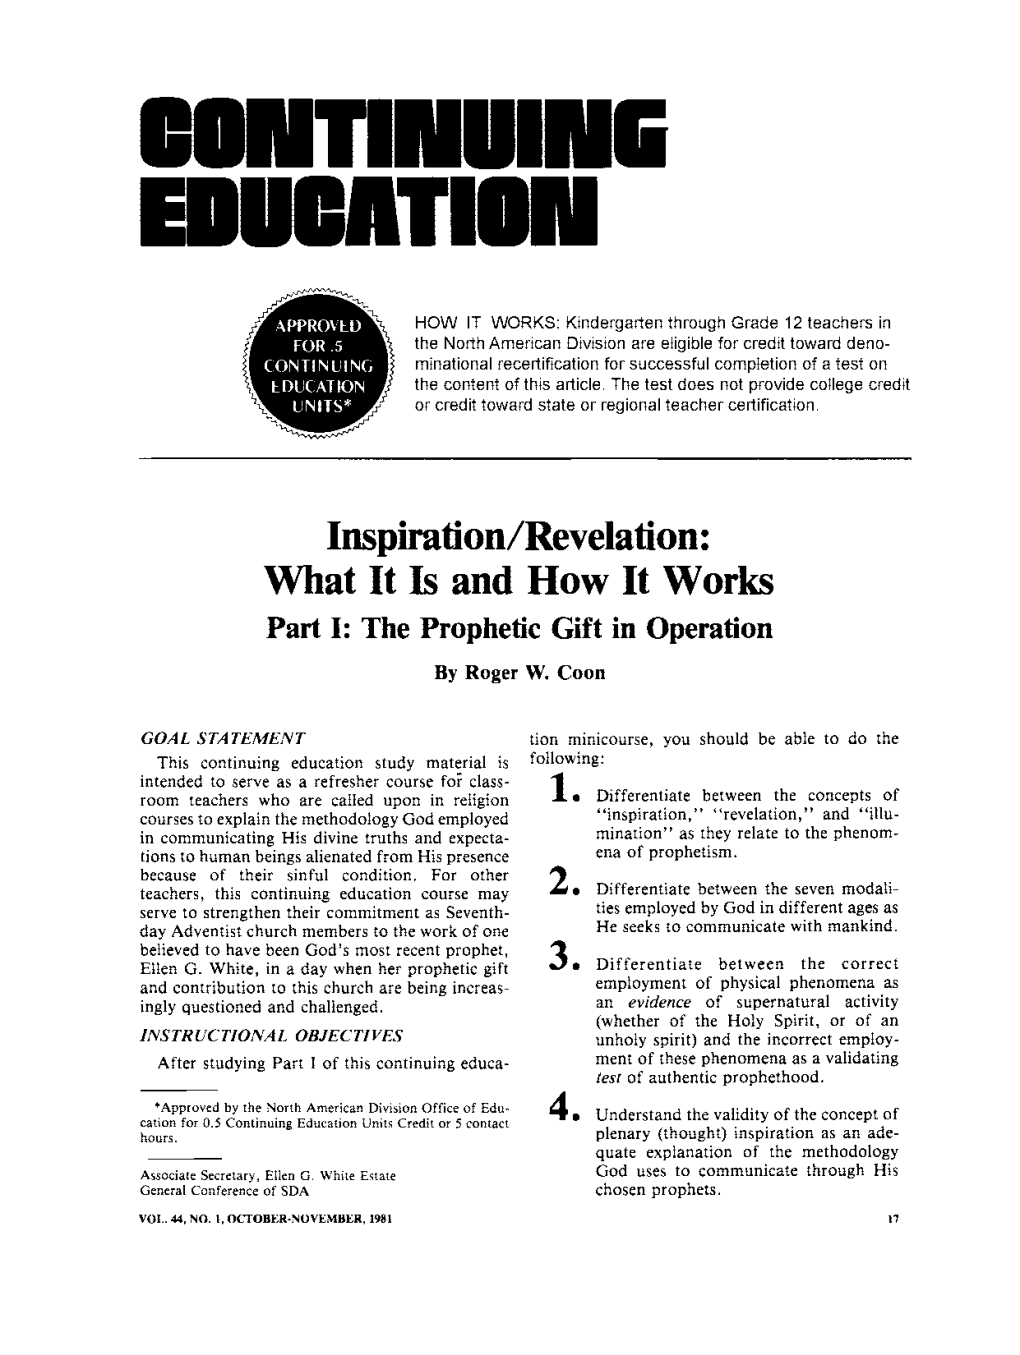 Inspiration/Revelation: What It Is and How It Works Part I: the Prophetic Gift in Operation by Roger W